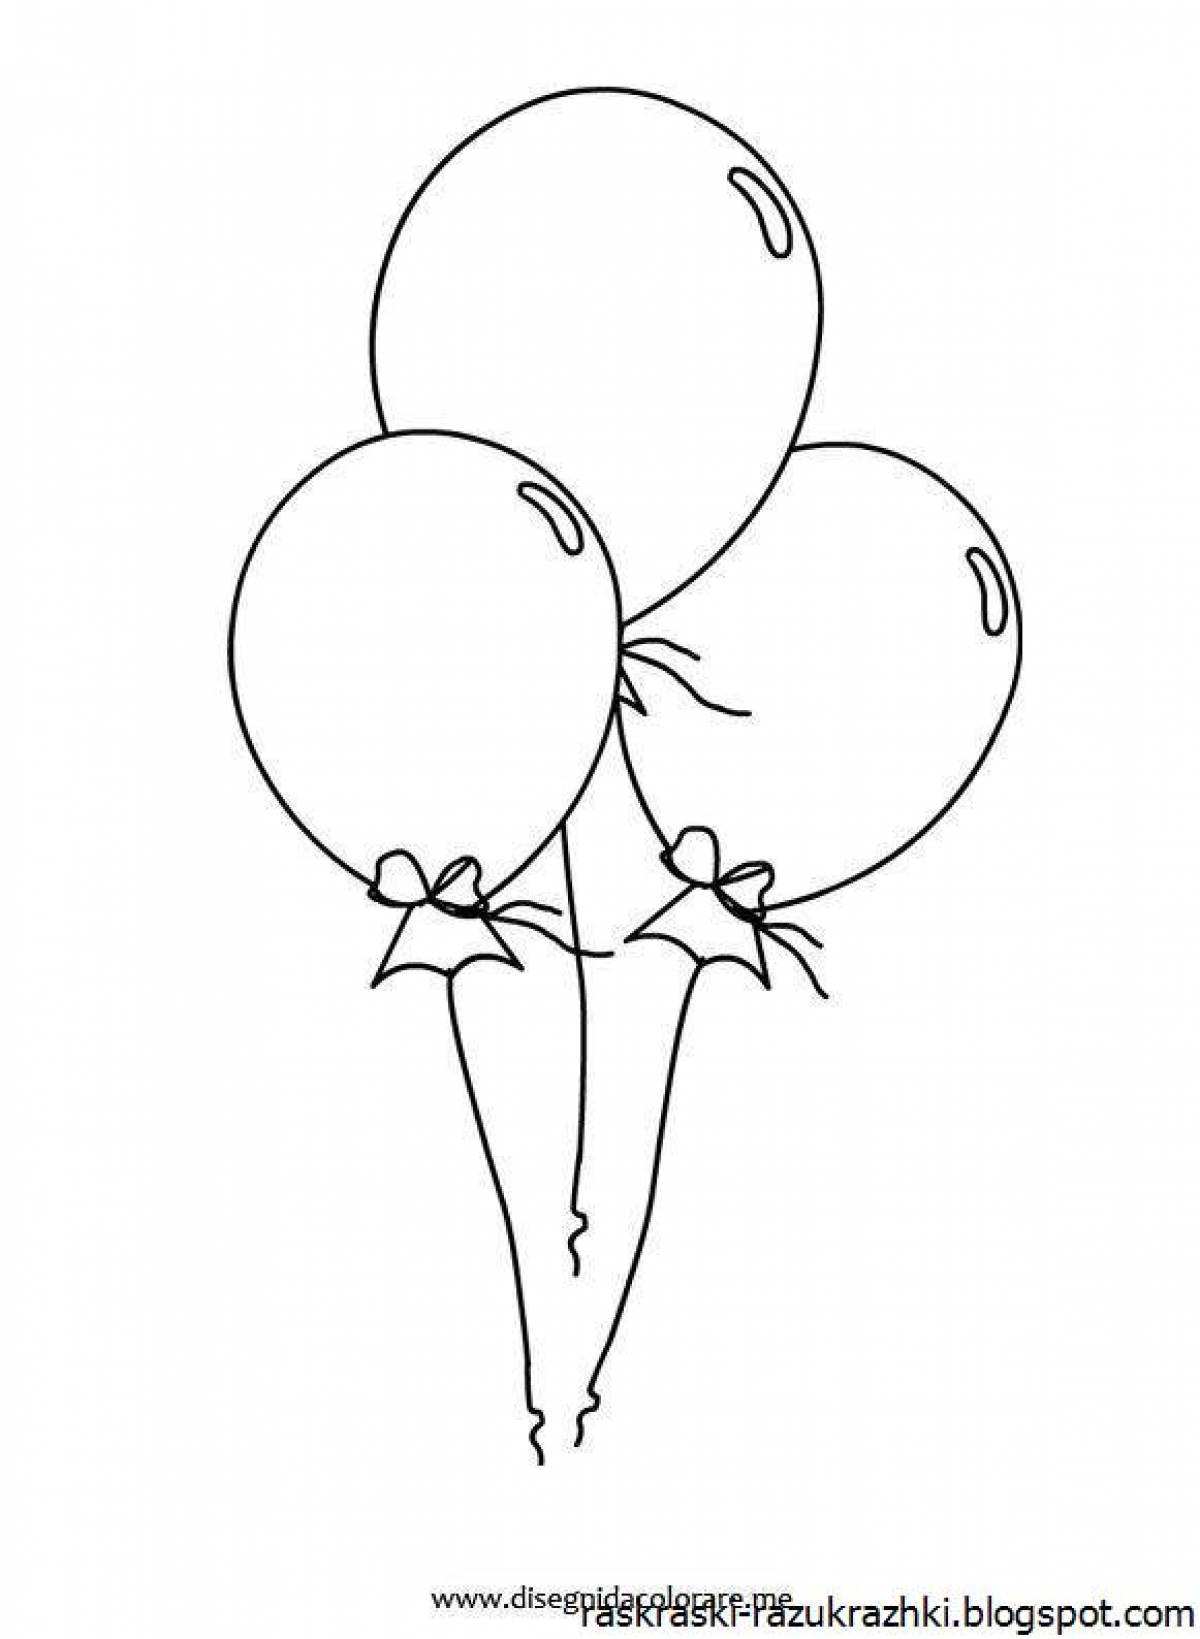 Great balloon coloring pages for kids